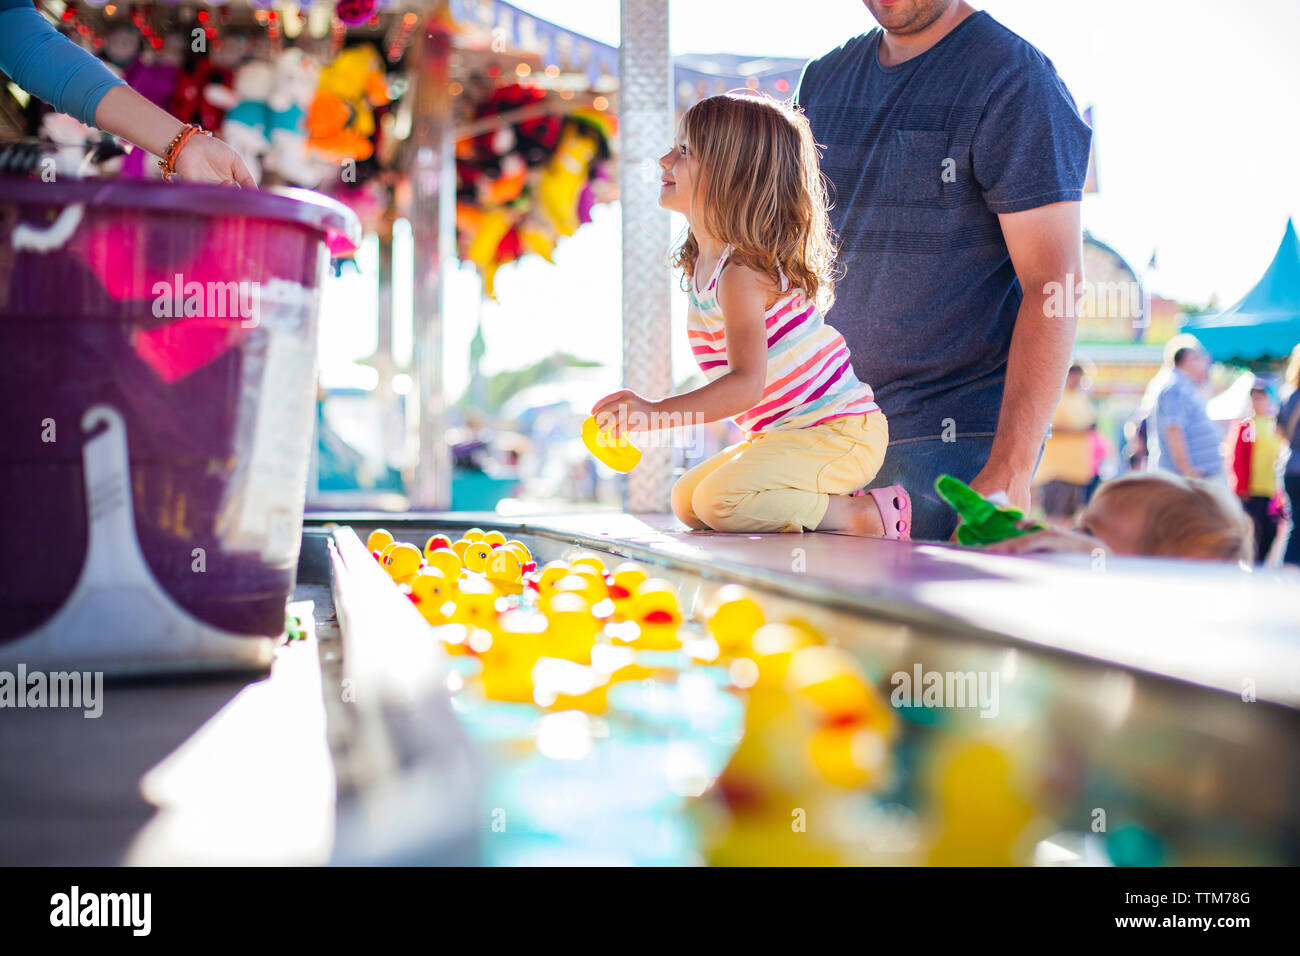 Father with daughter holding rubber duck while enjoying in amusement park Stock Photo